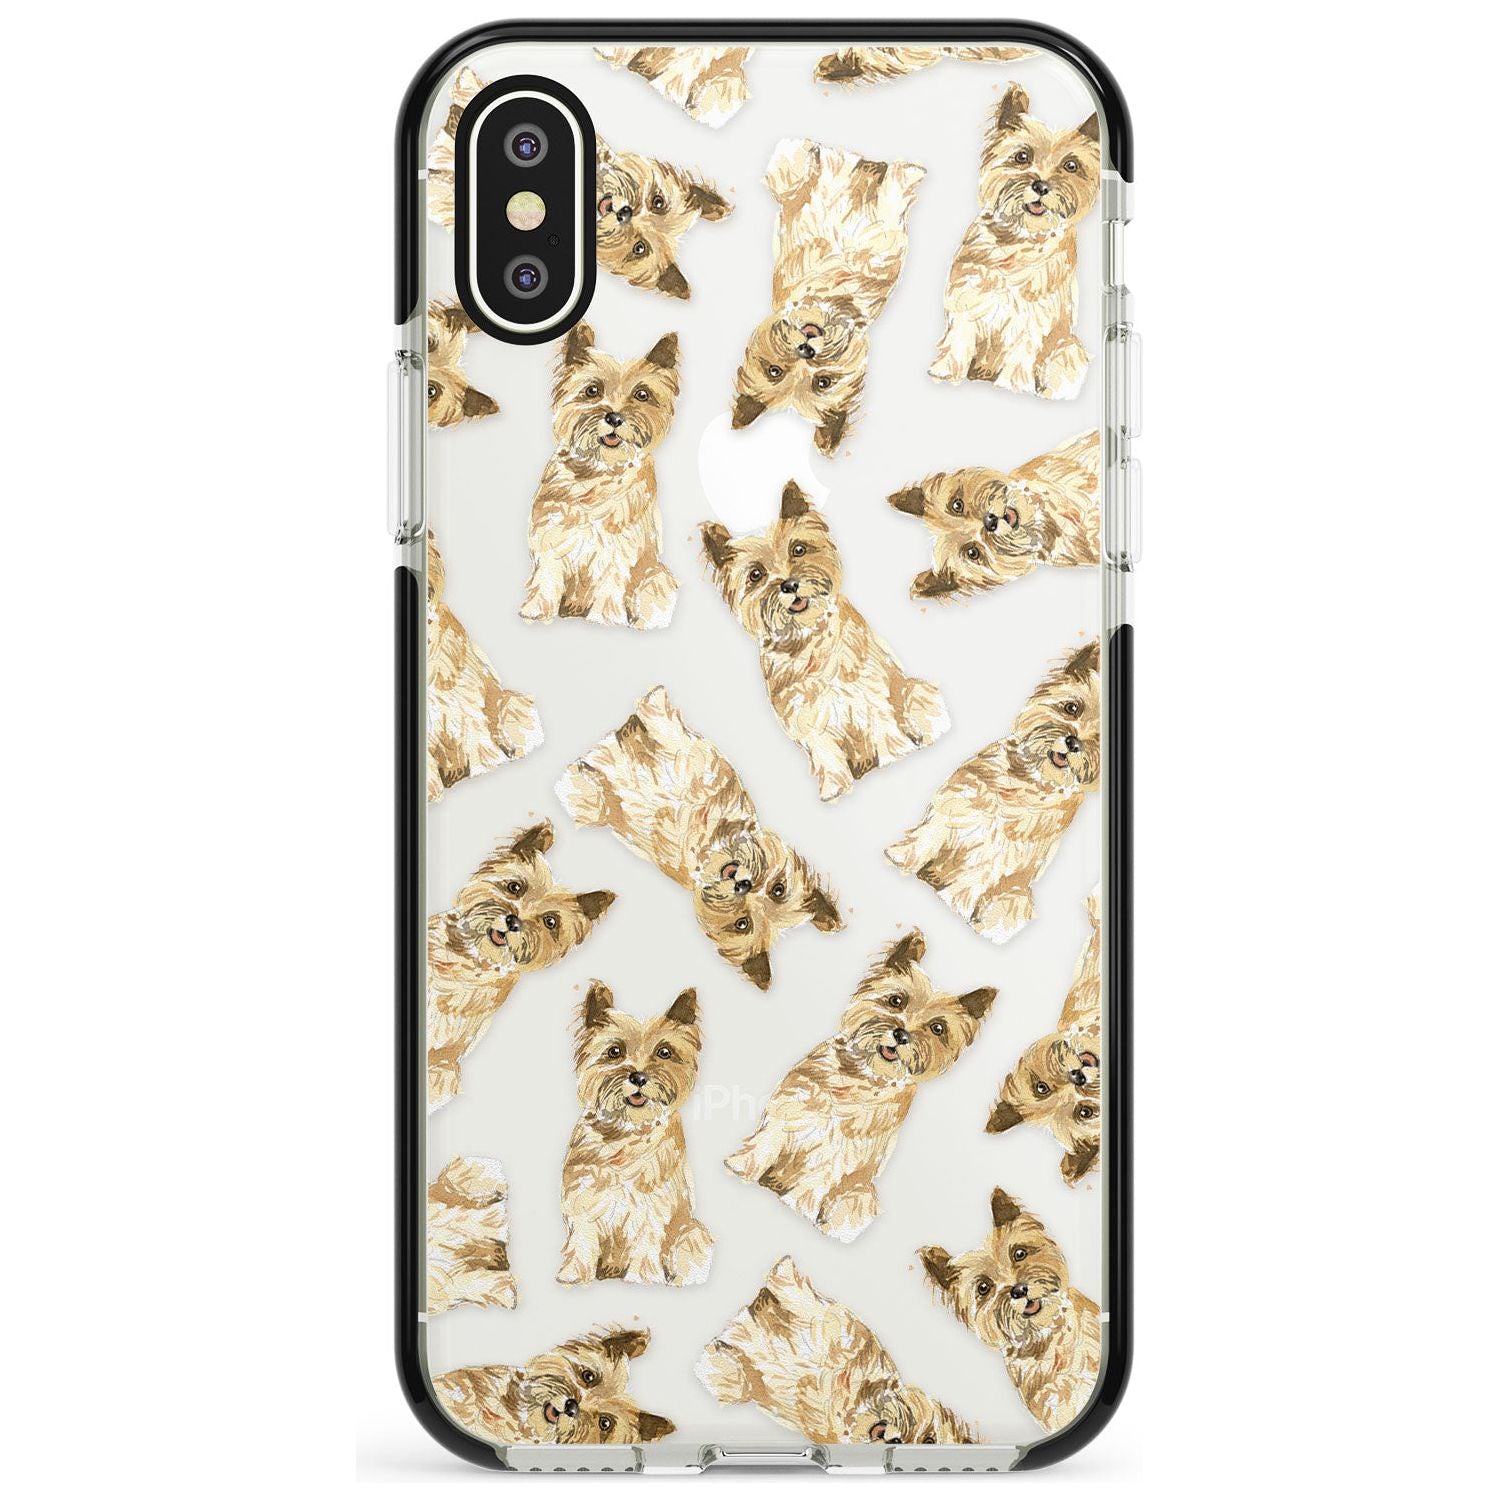 Cairn Terrier Watercolour Dog Pattern Black Impact Phone Case for iPhone X XS Max XR